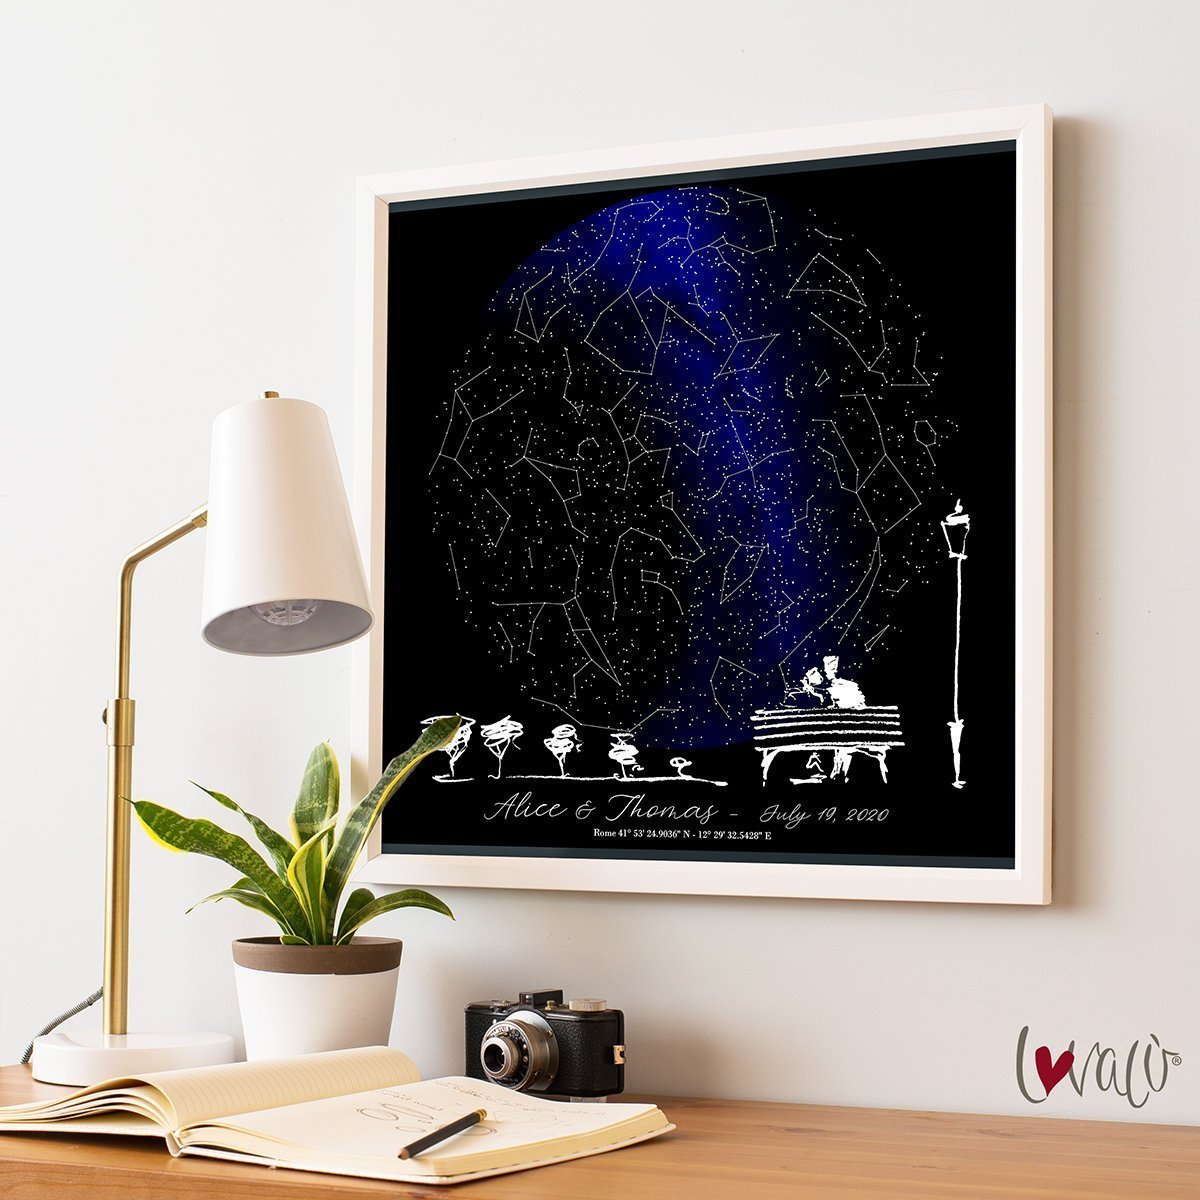 Custom Star Map, Night Sky Print, Star Map Poster, Wedding Gift, Constellation, Wedding Anniversary Gift, Personalized Gift, Engagement Gift - Lovalù